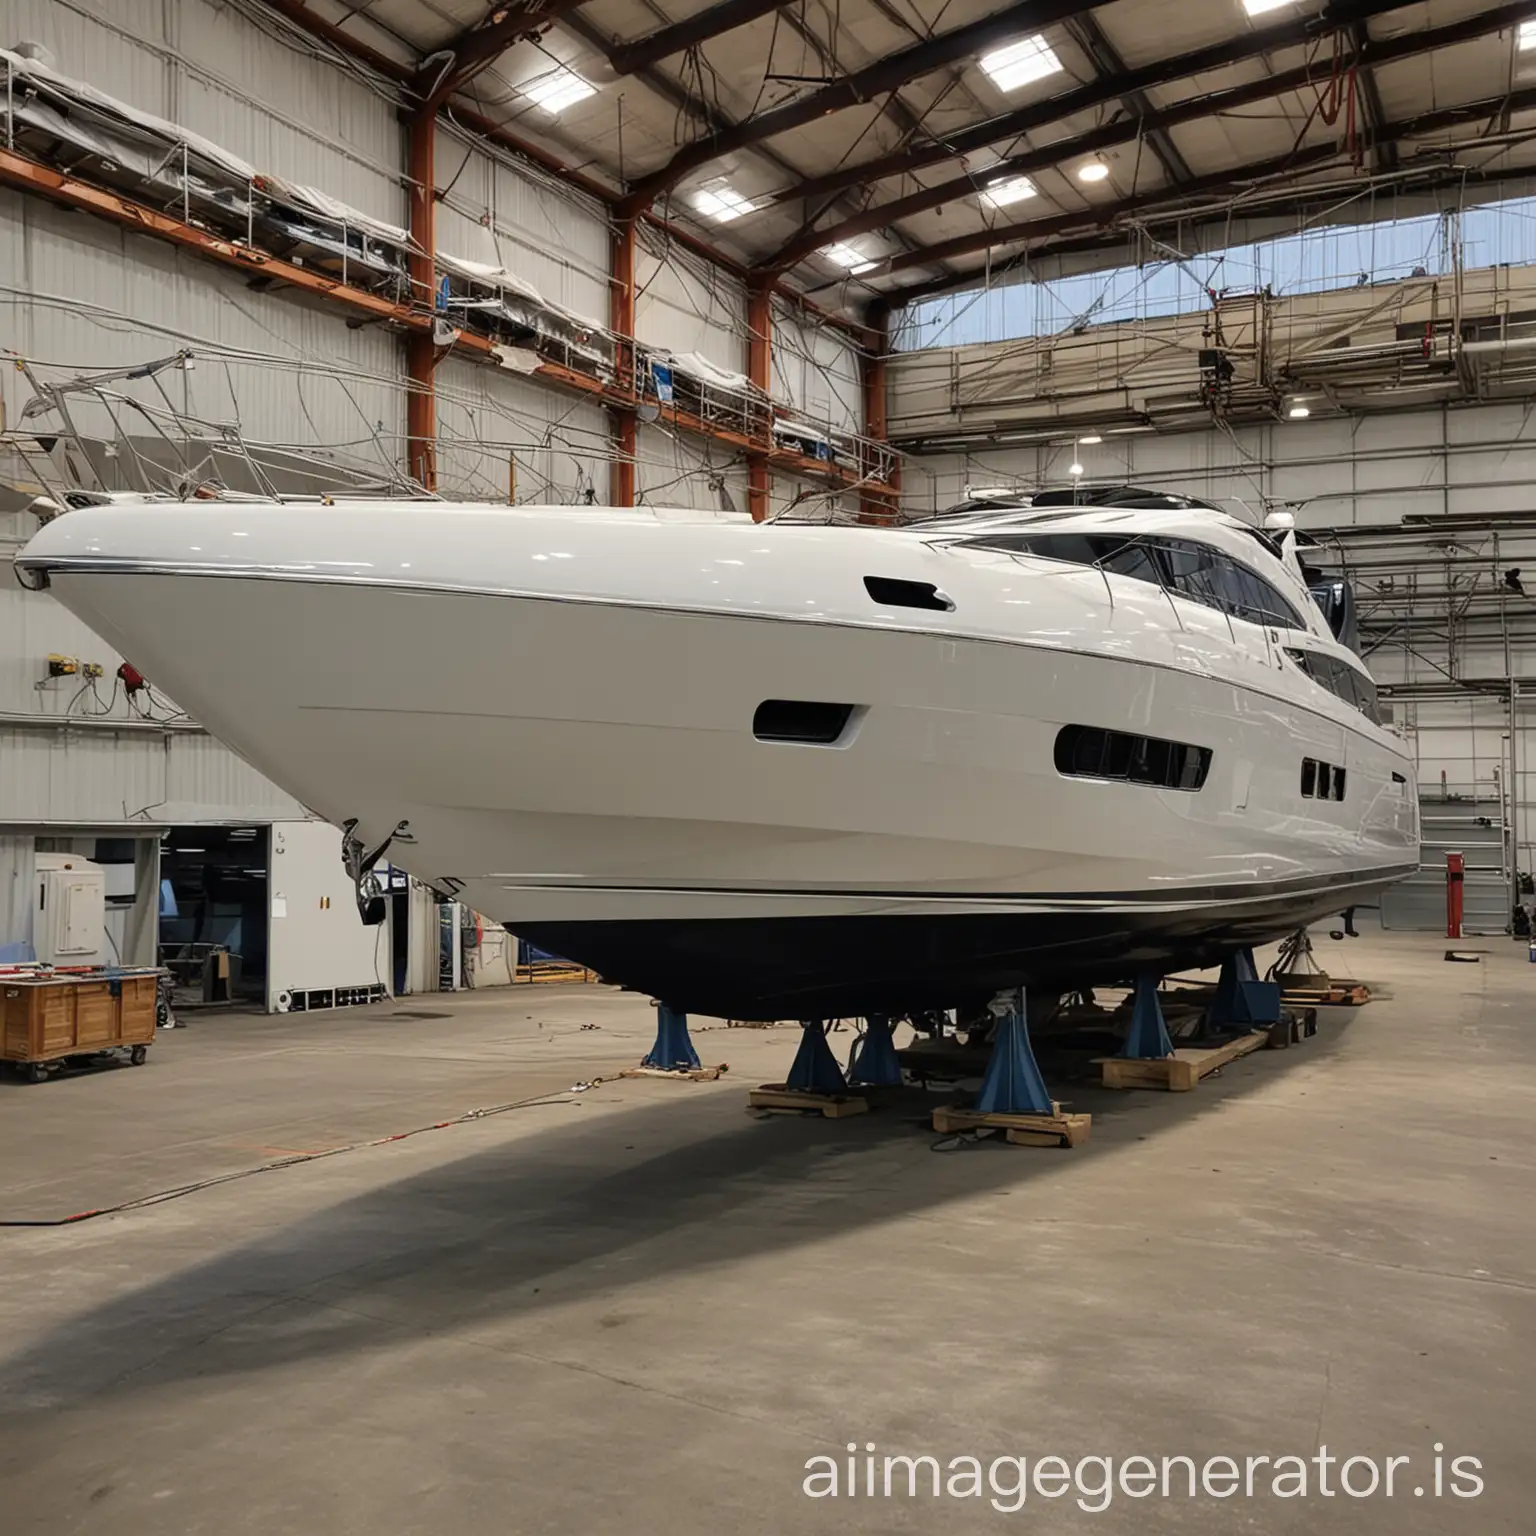 Luxury-Yacht-Hull-Parked-in-a-Hangar